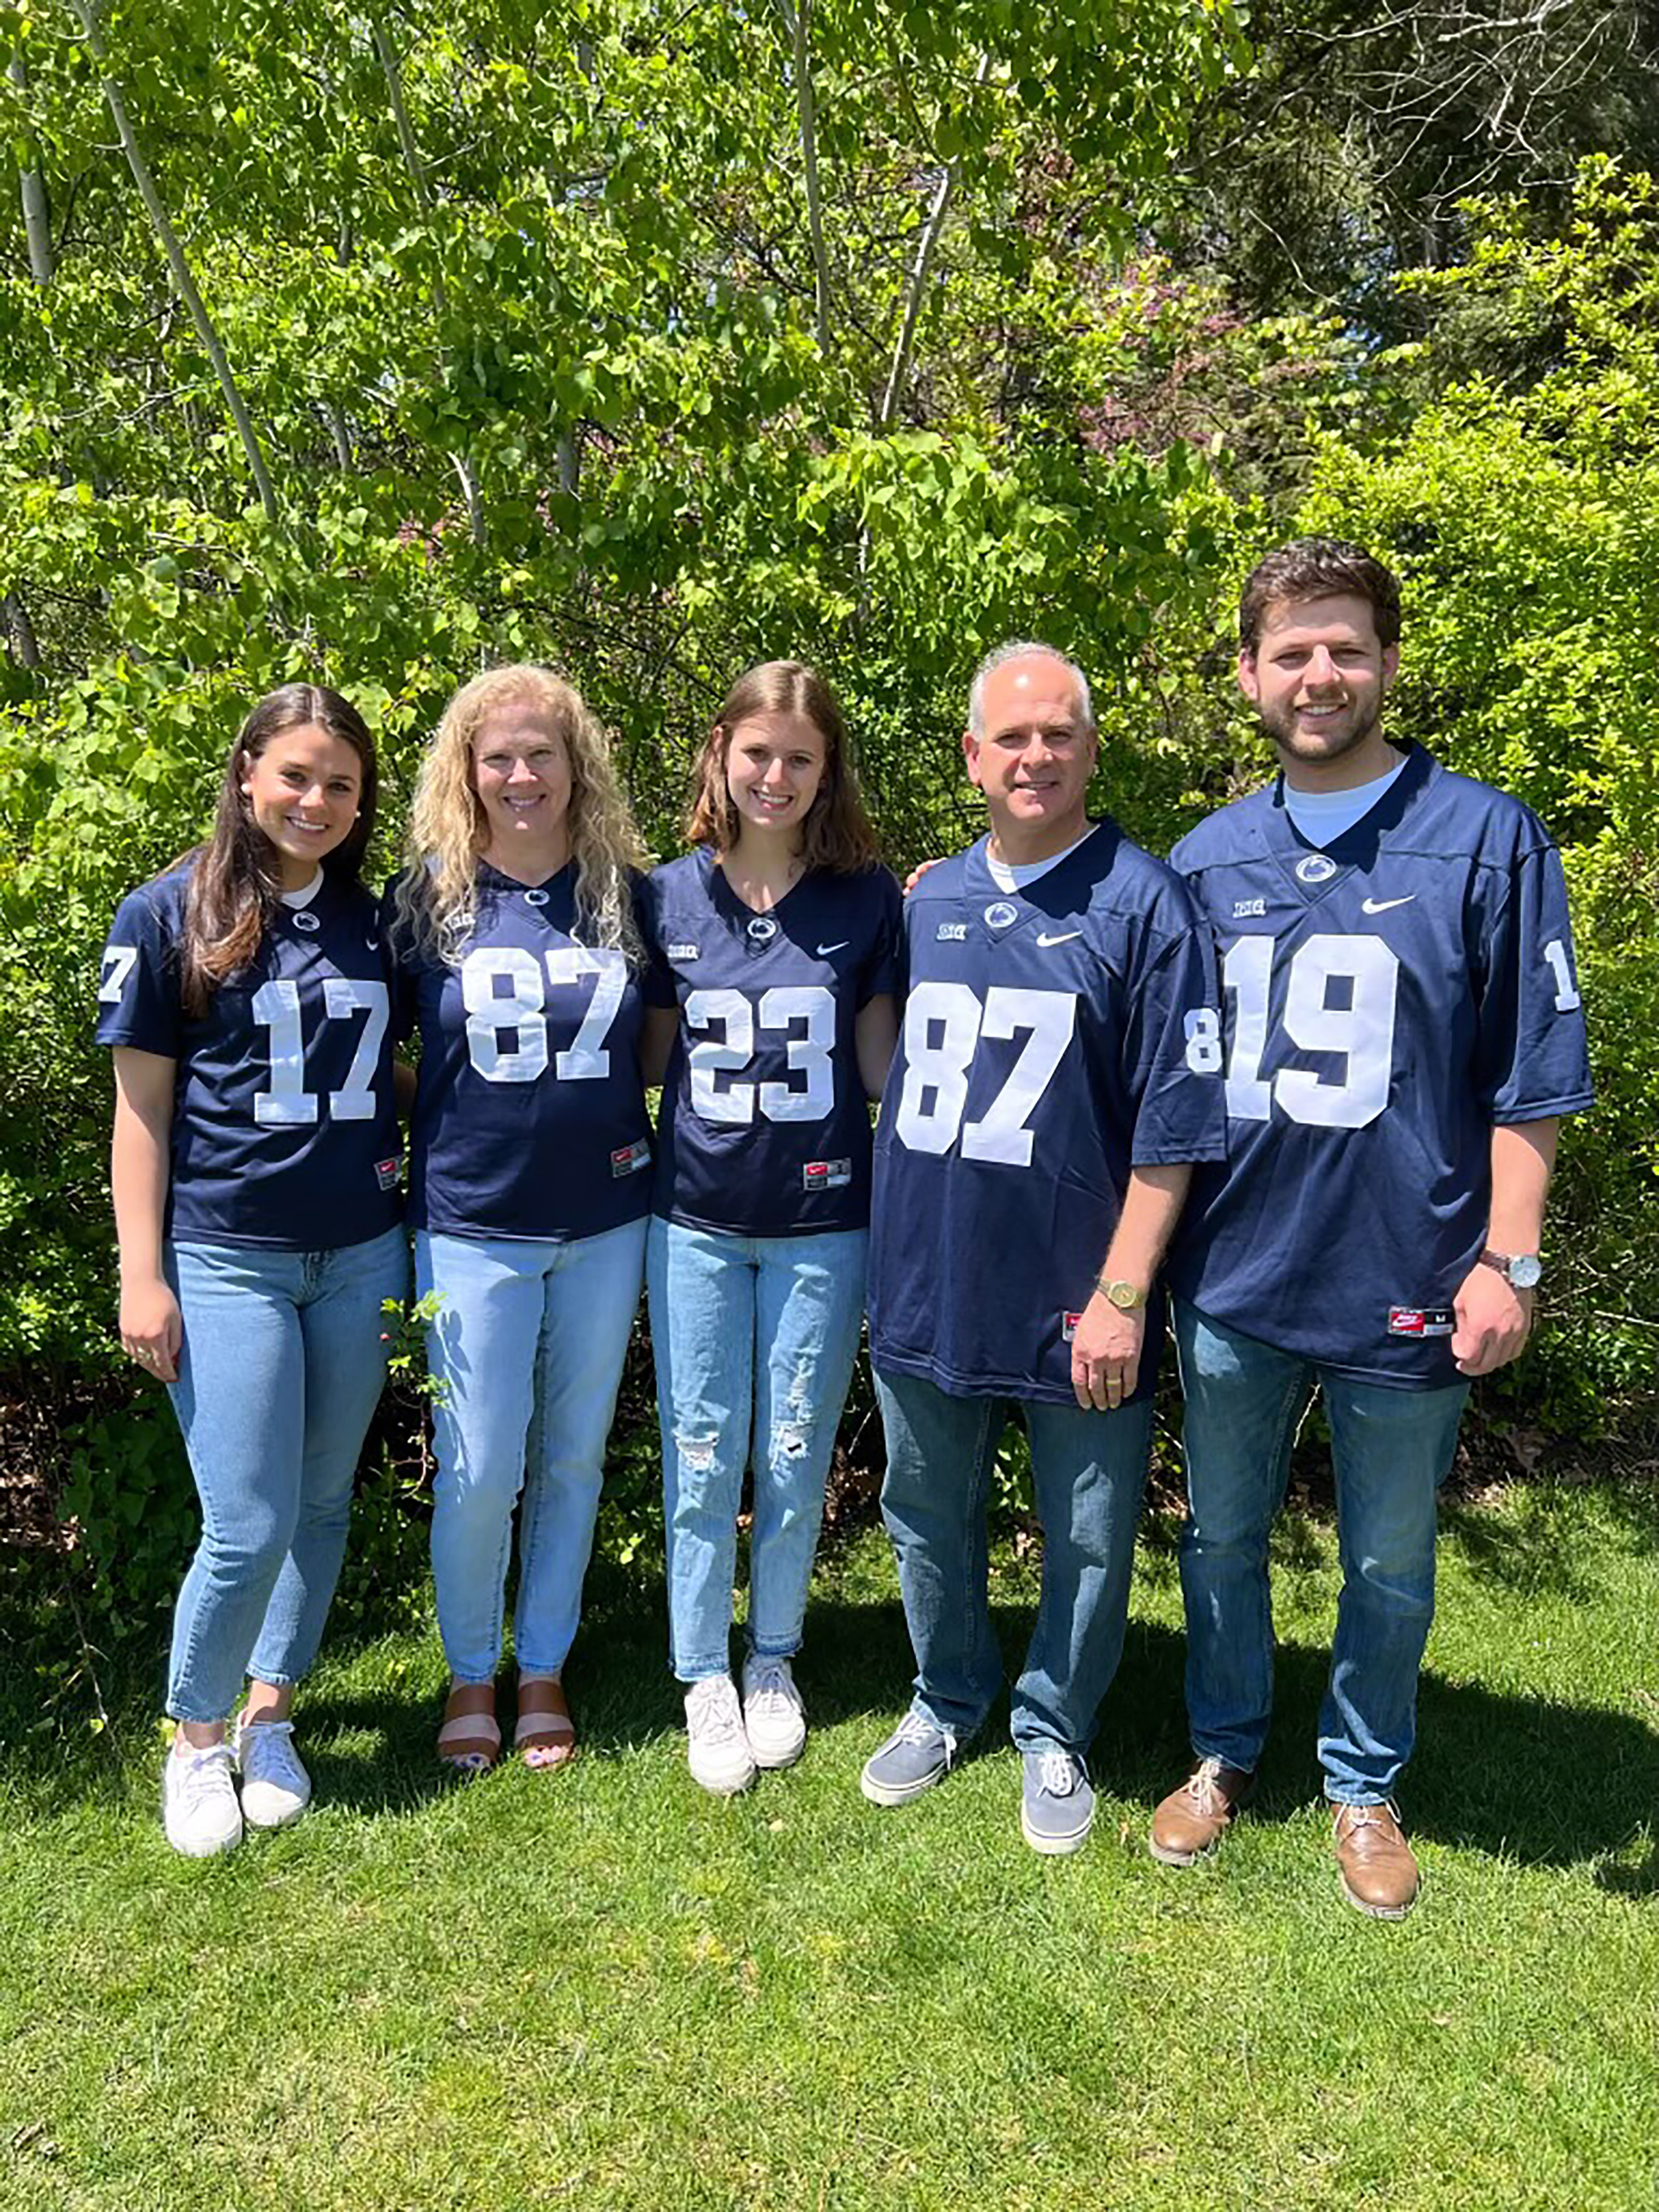 Harris family in Penn Stater jerseys with grad years on them, courtesy